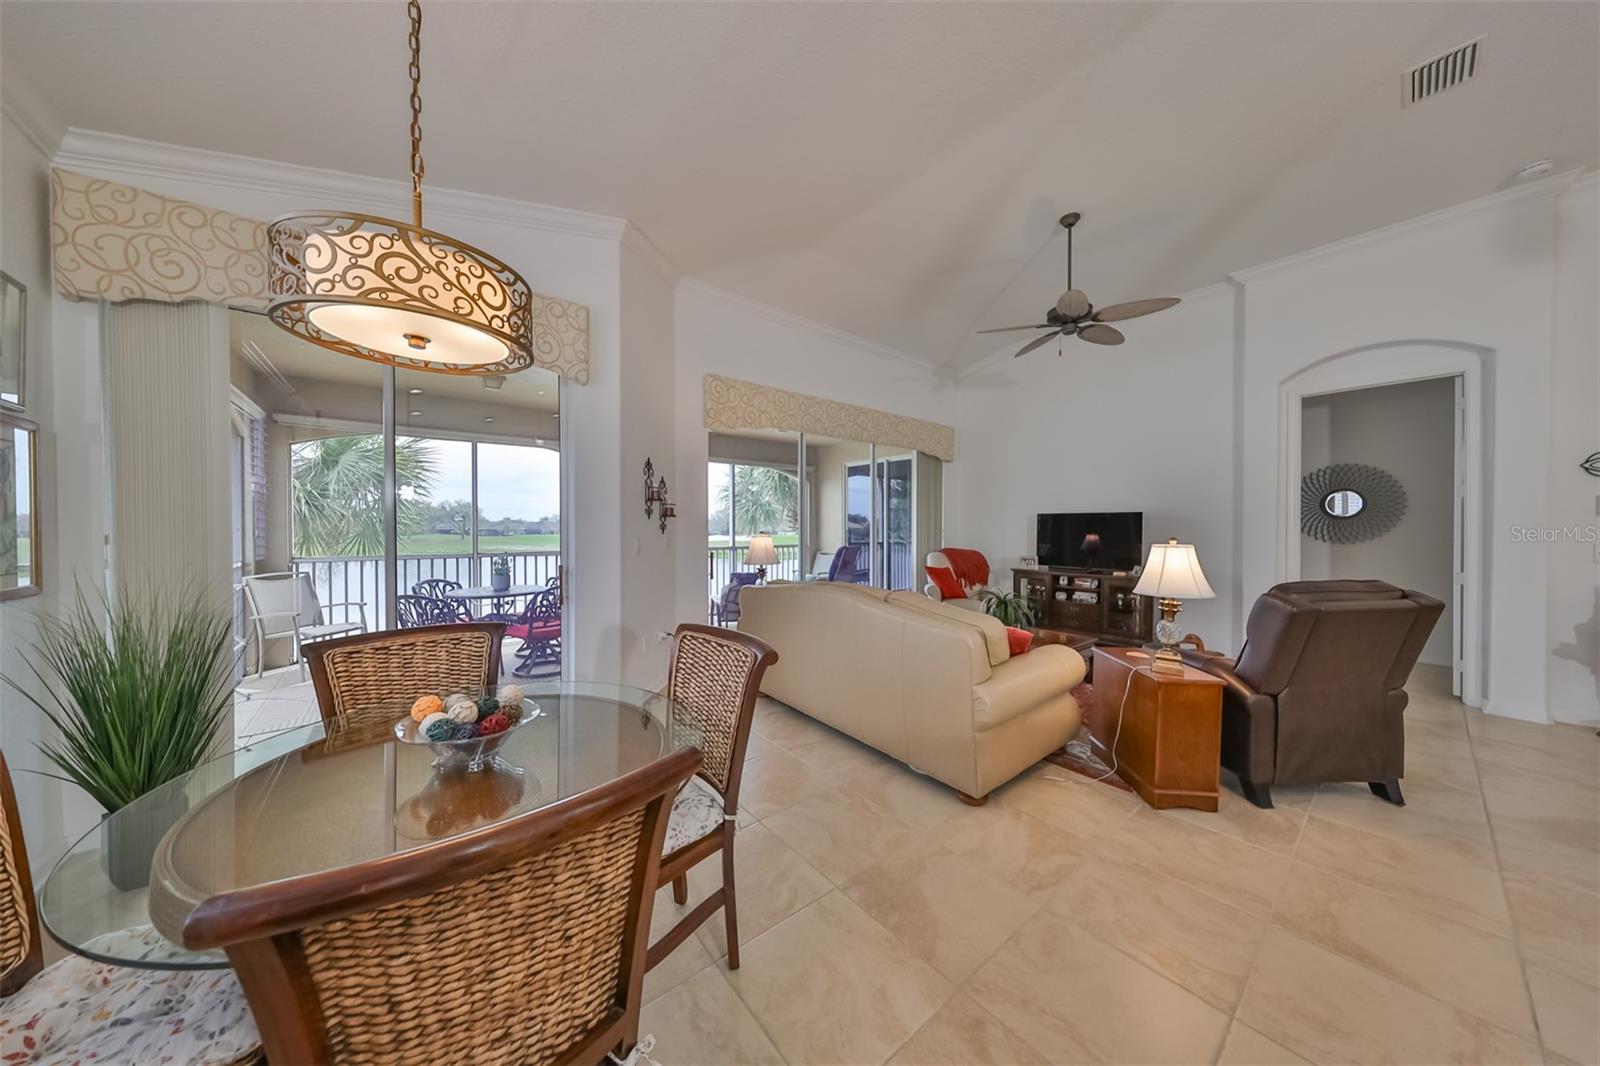 The dinette area is complete with a water/golf course view and tropical feeling table and chairs.  Remember...this is a TURN-KEY condo.